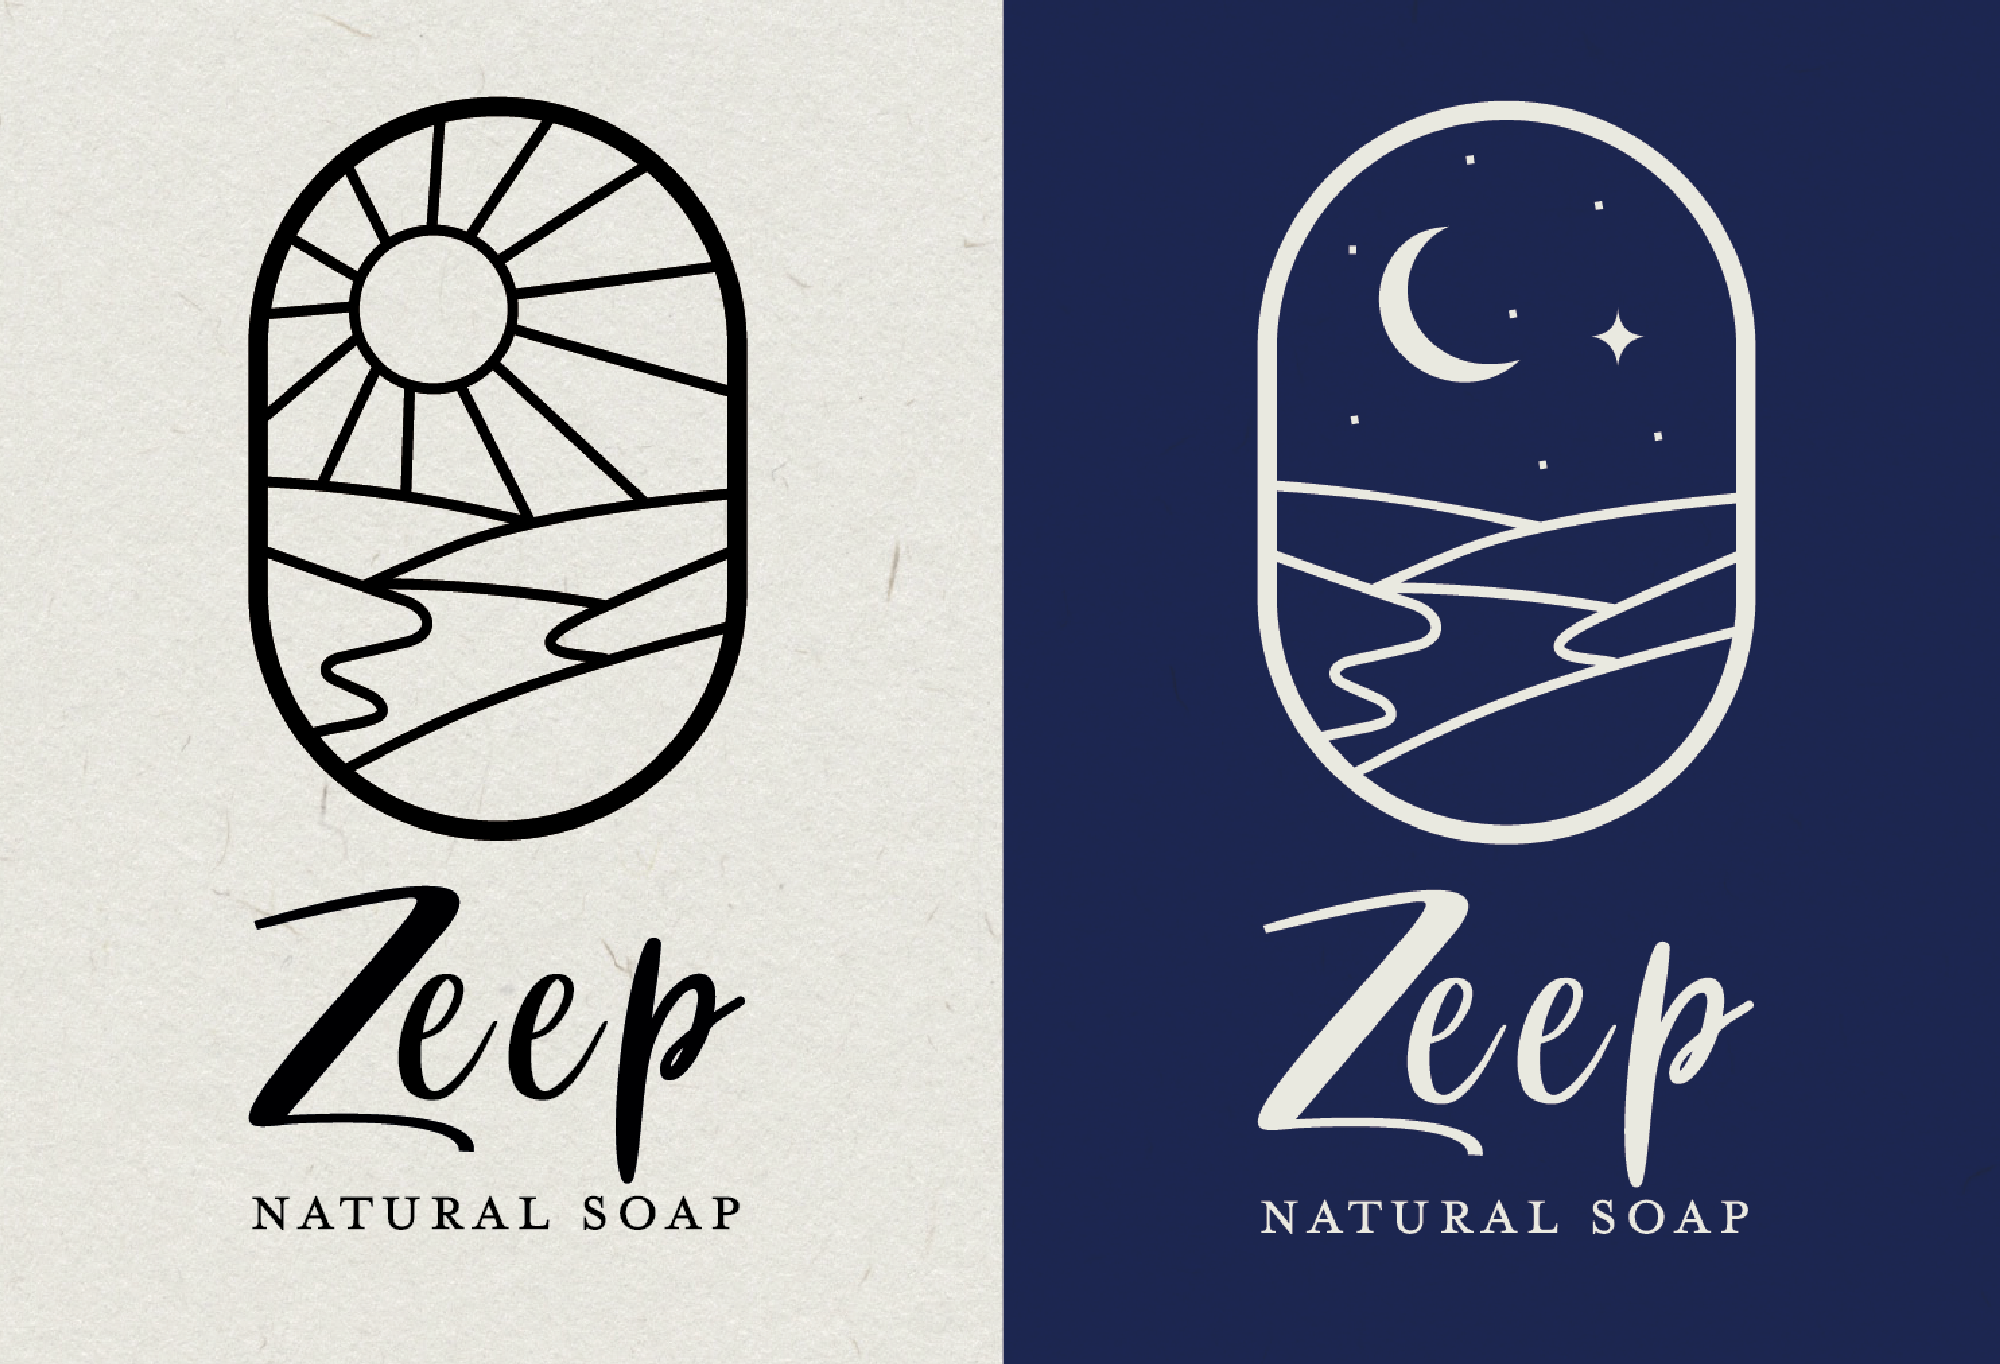 Zeep Natural Soap covers by Katya Voitko